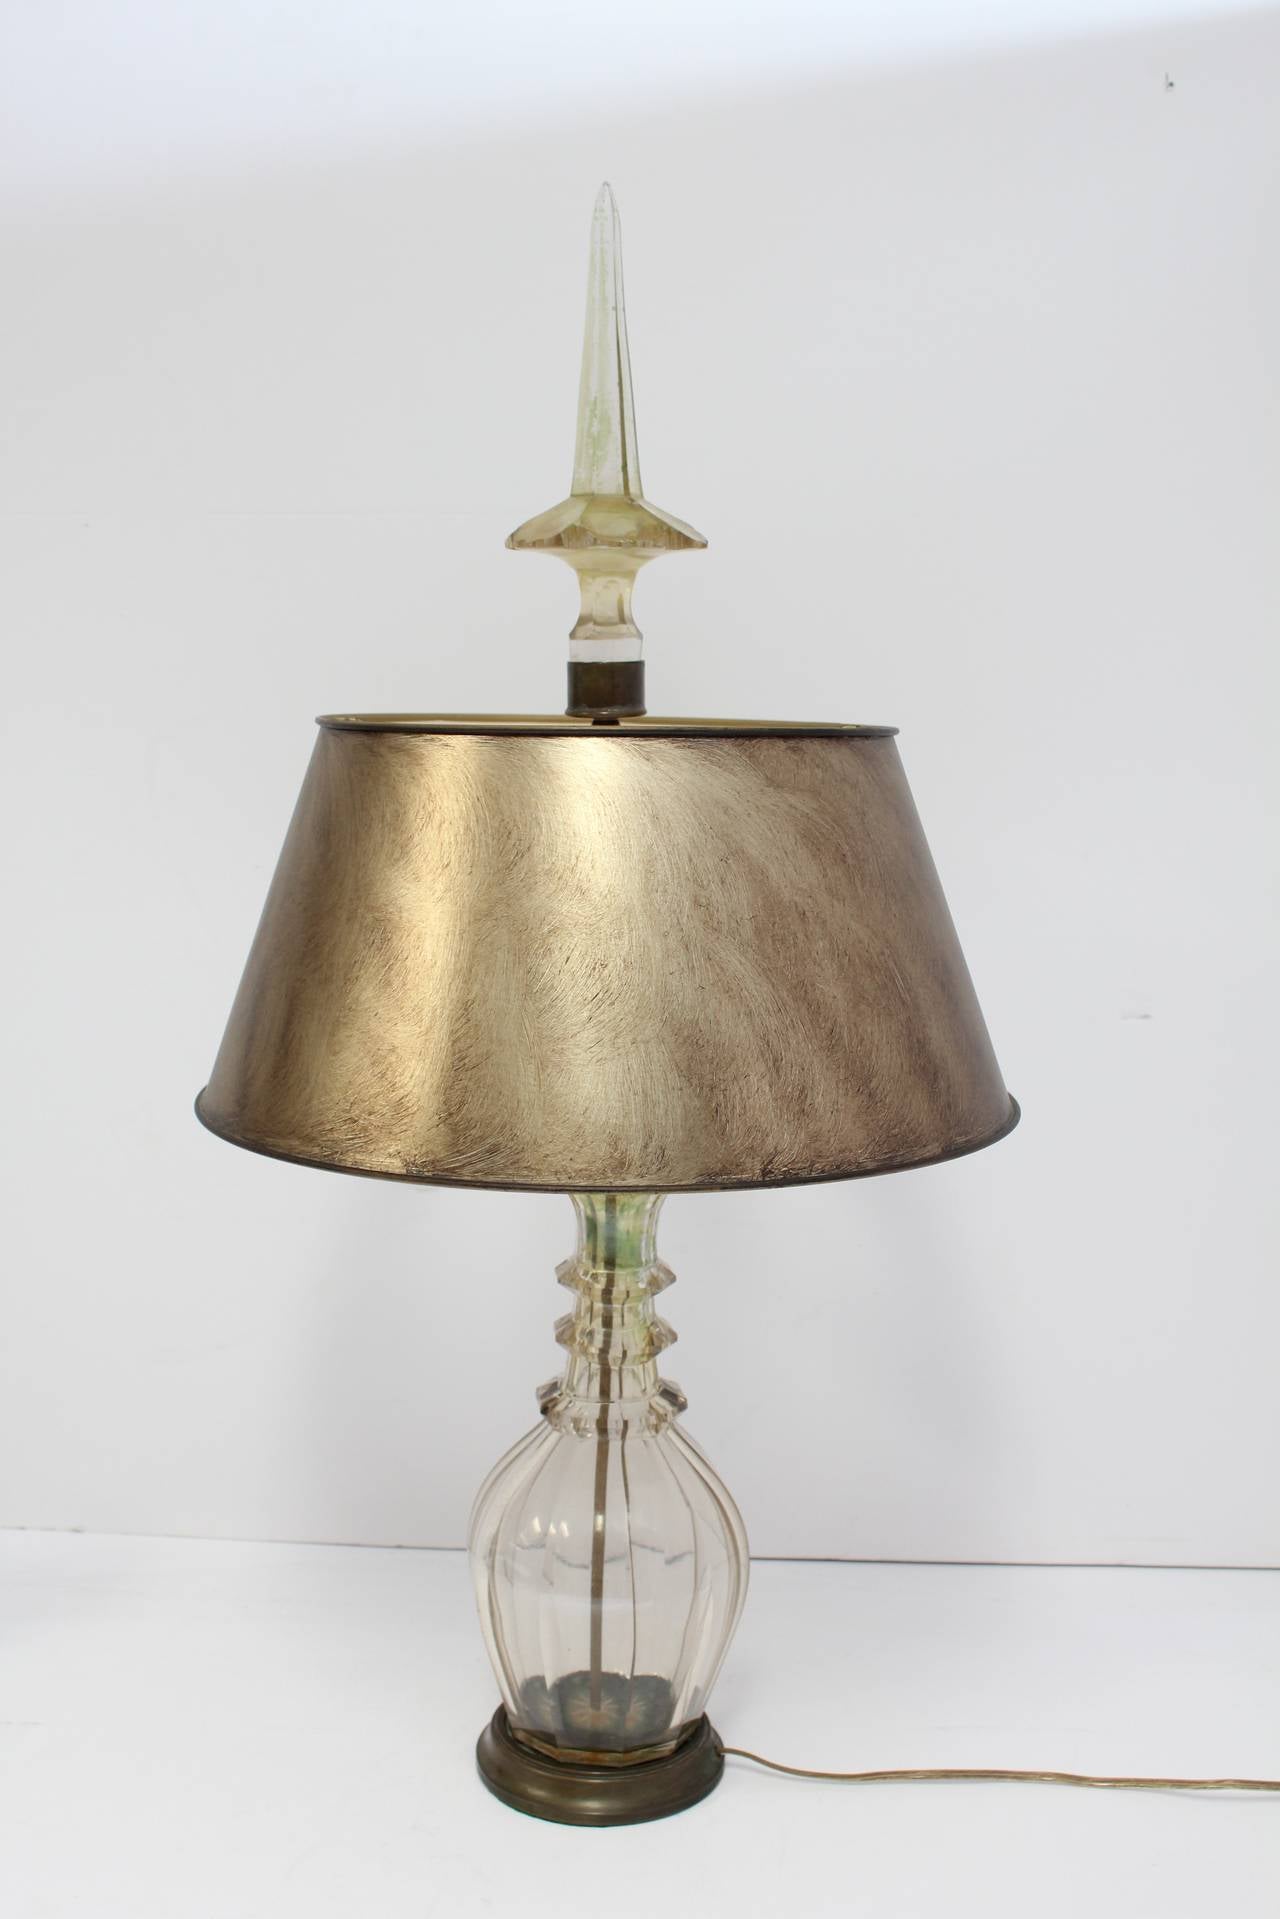 19th century Moser smoky champagne cut-glass carafe turned into table lamp with hand-painted shade.